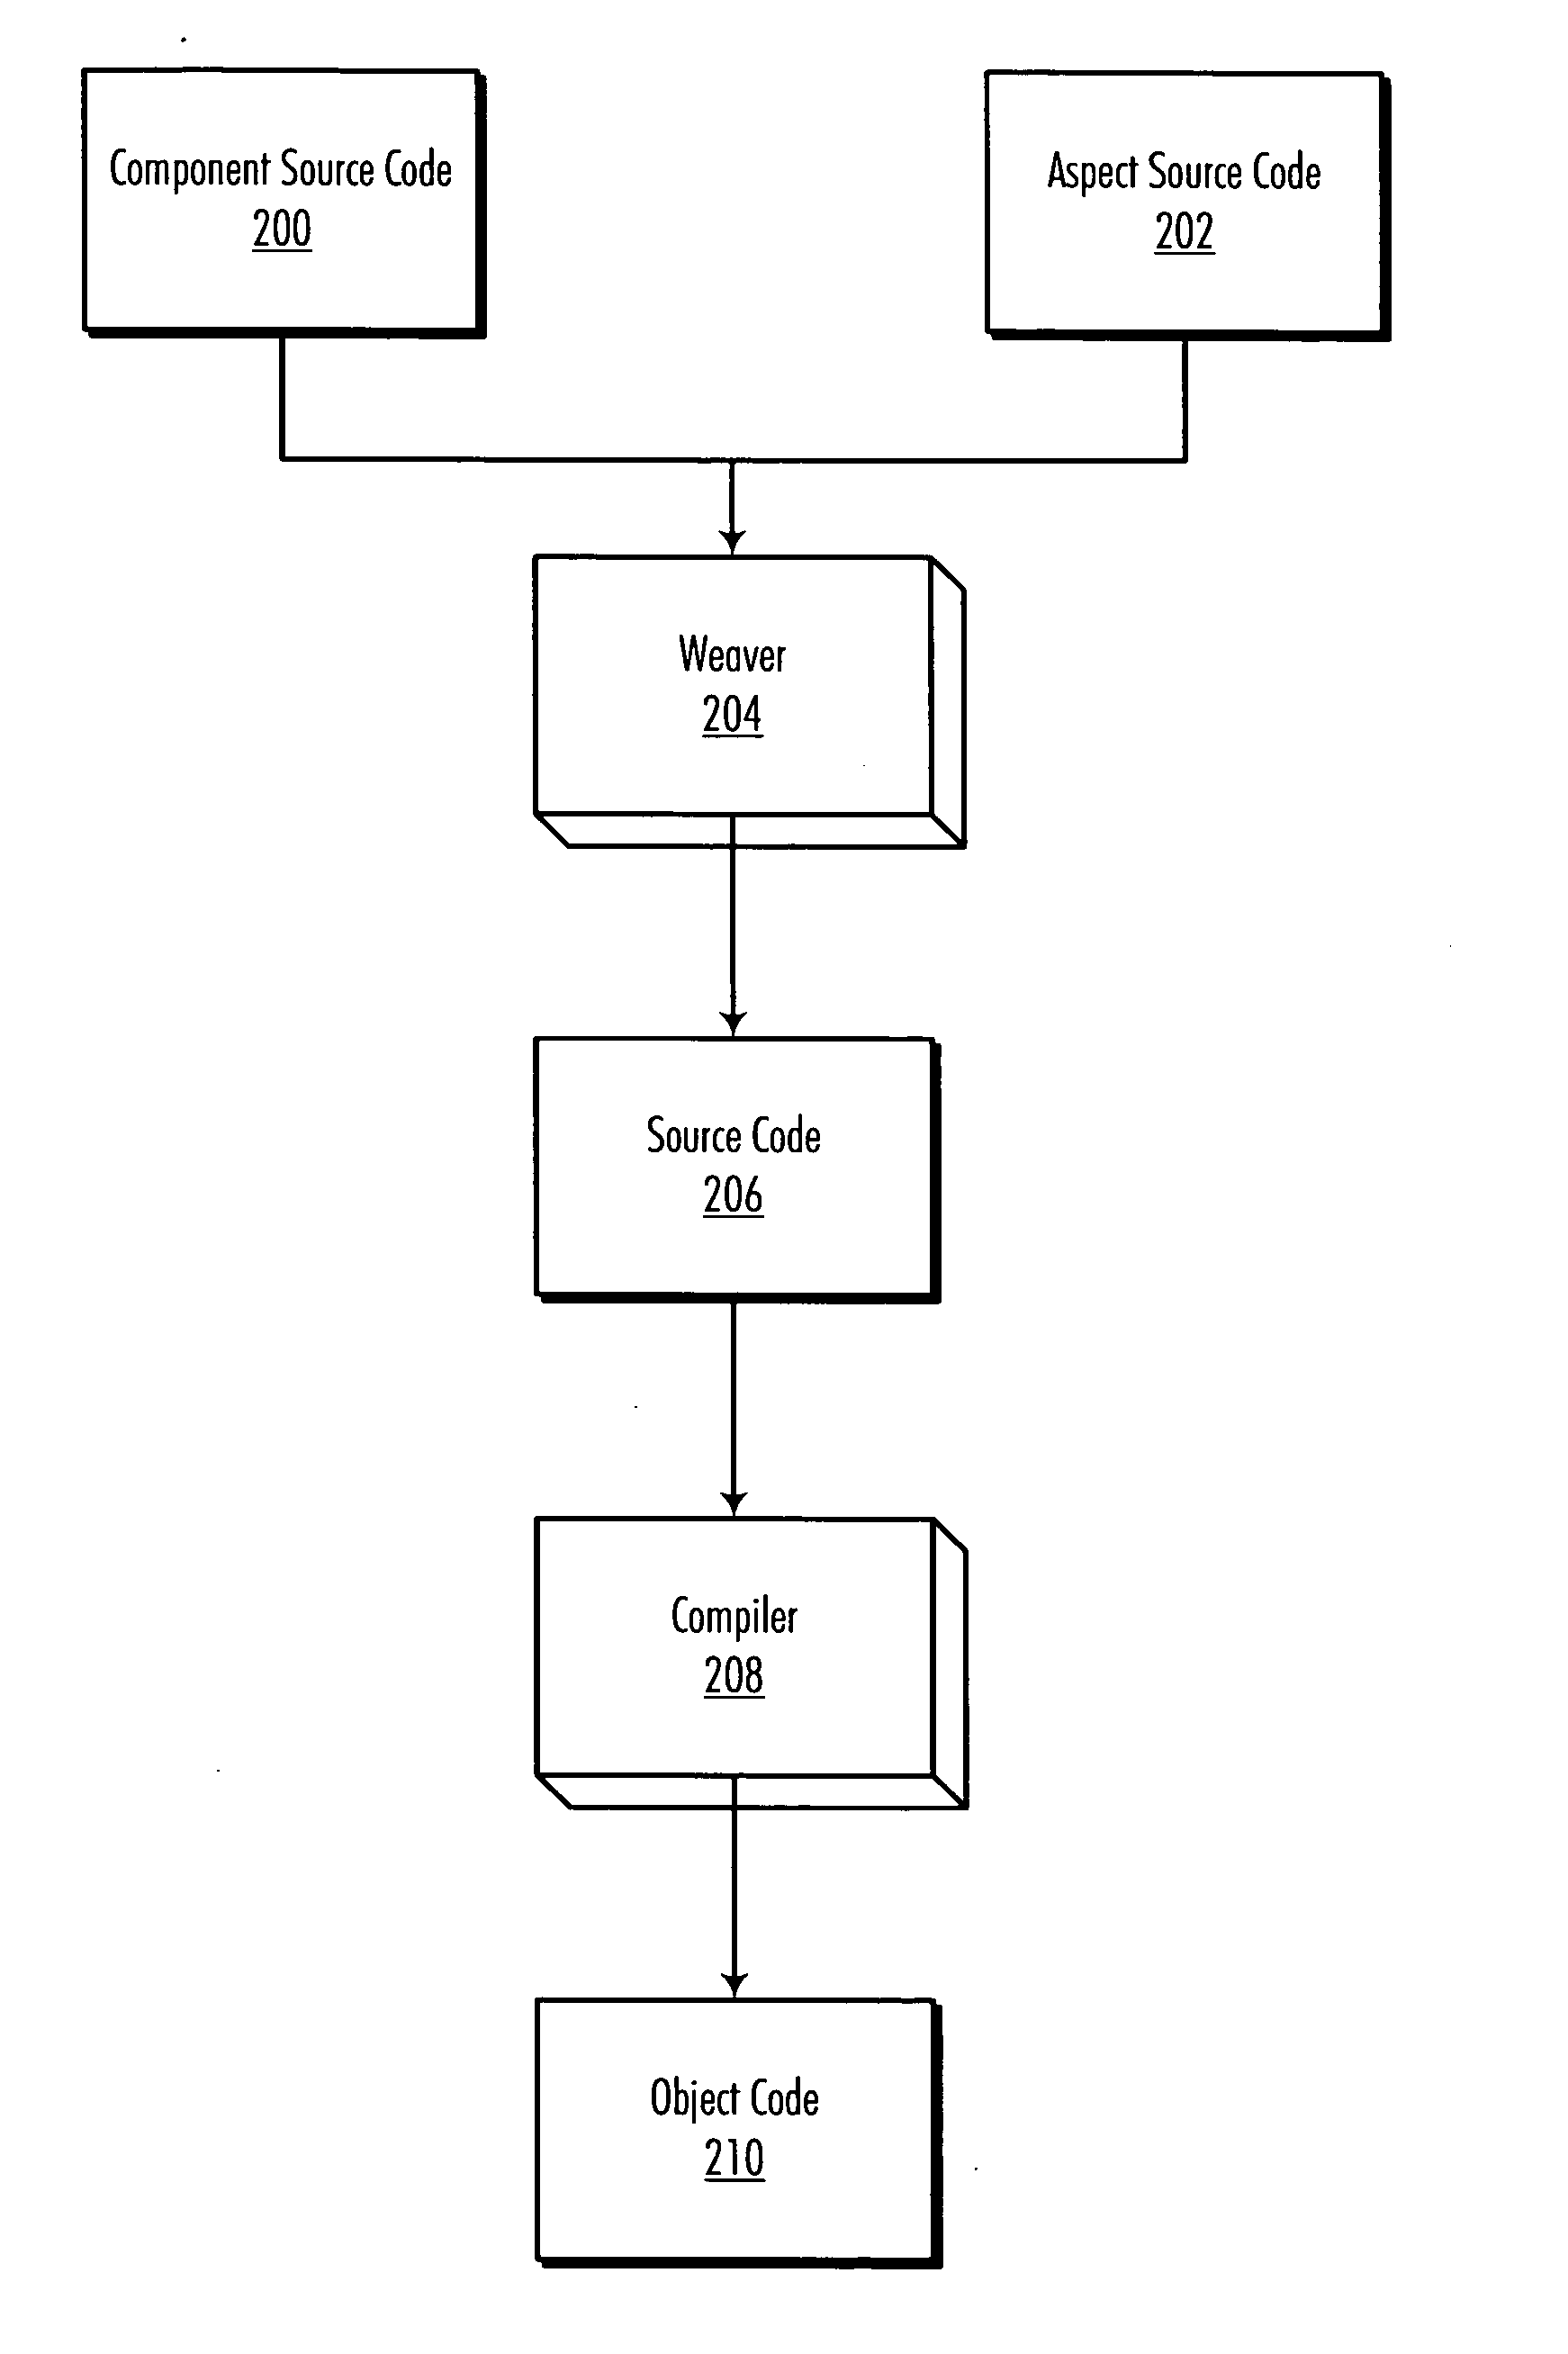 Method and apparatus for protecting HTTP session data from data crossover using aspect-oriented programming